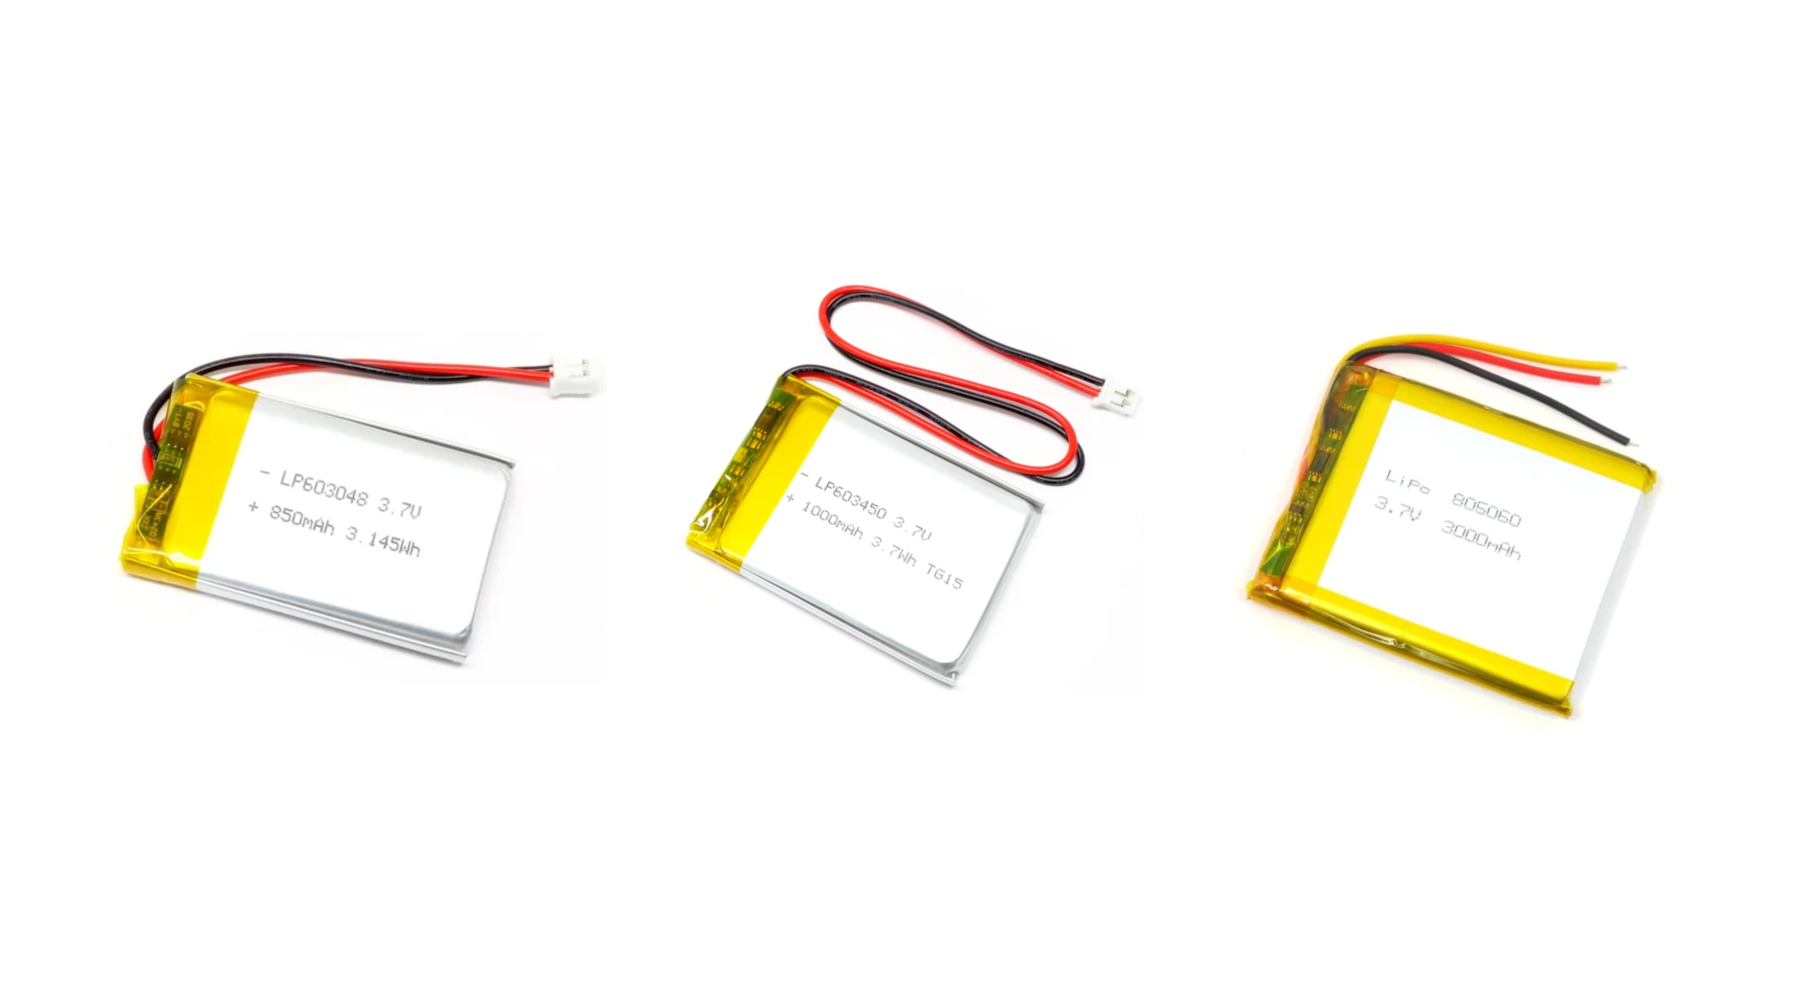 What is a LiPo Battery?